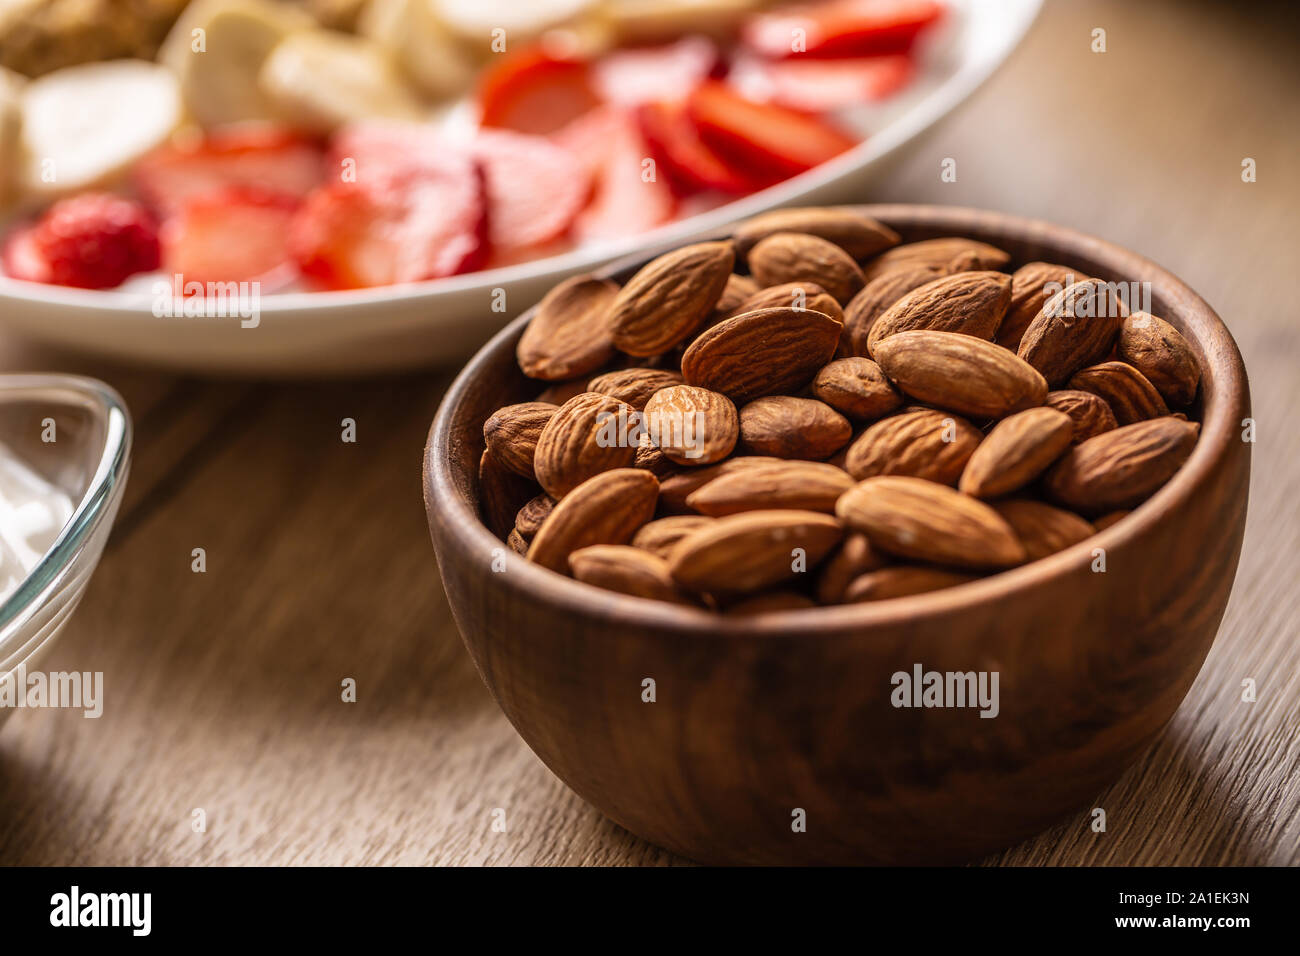 Almonds in wooden bowl with yoguth and plate of healthy breakfast Stock Photo